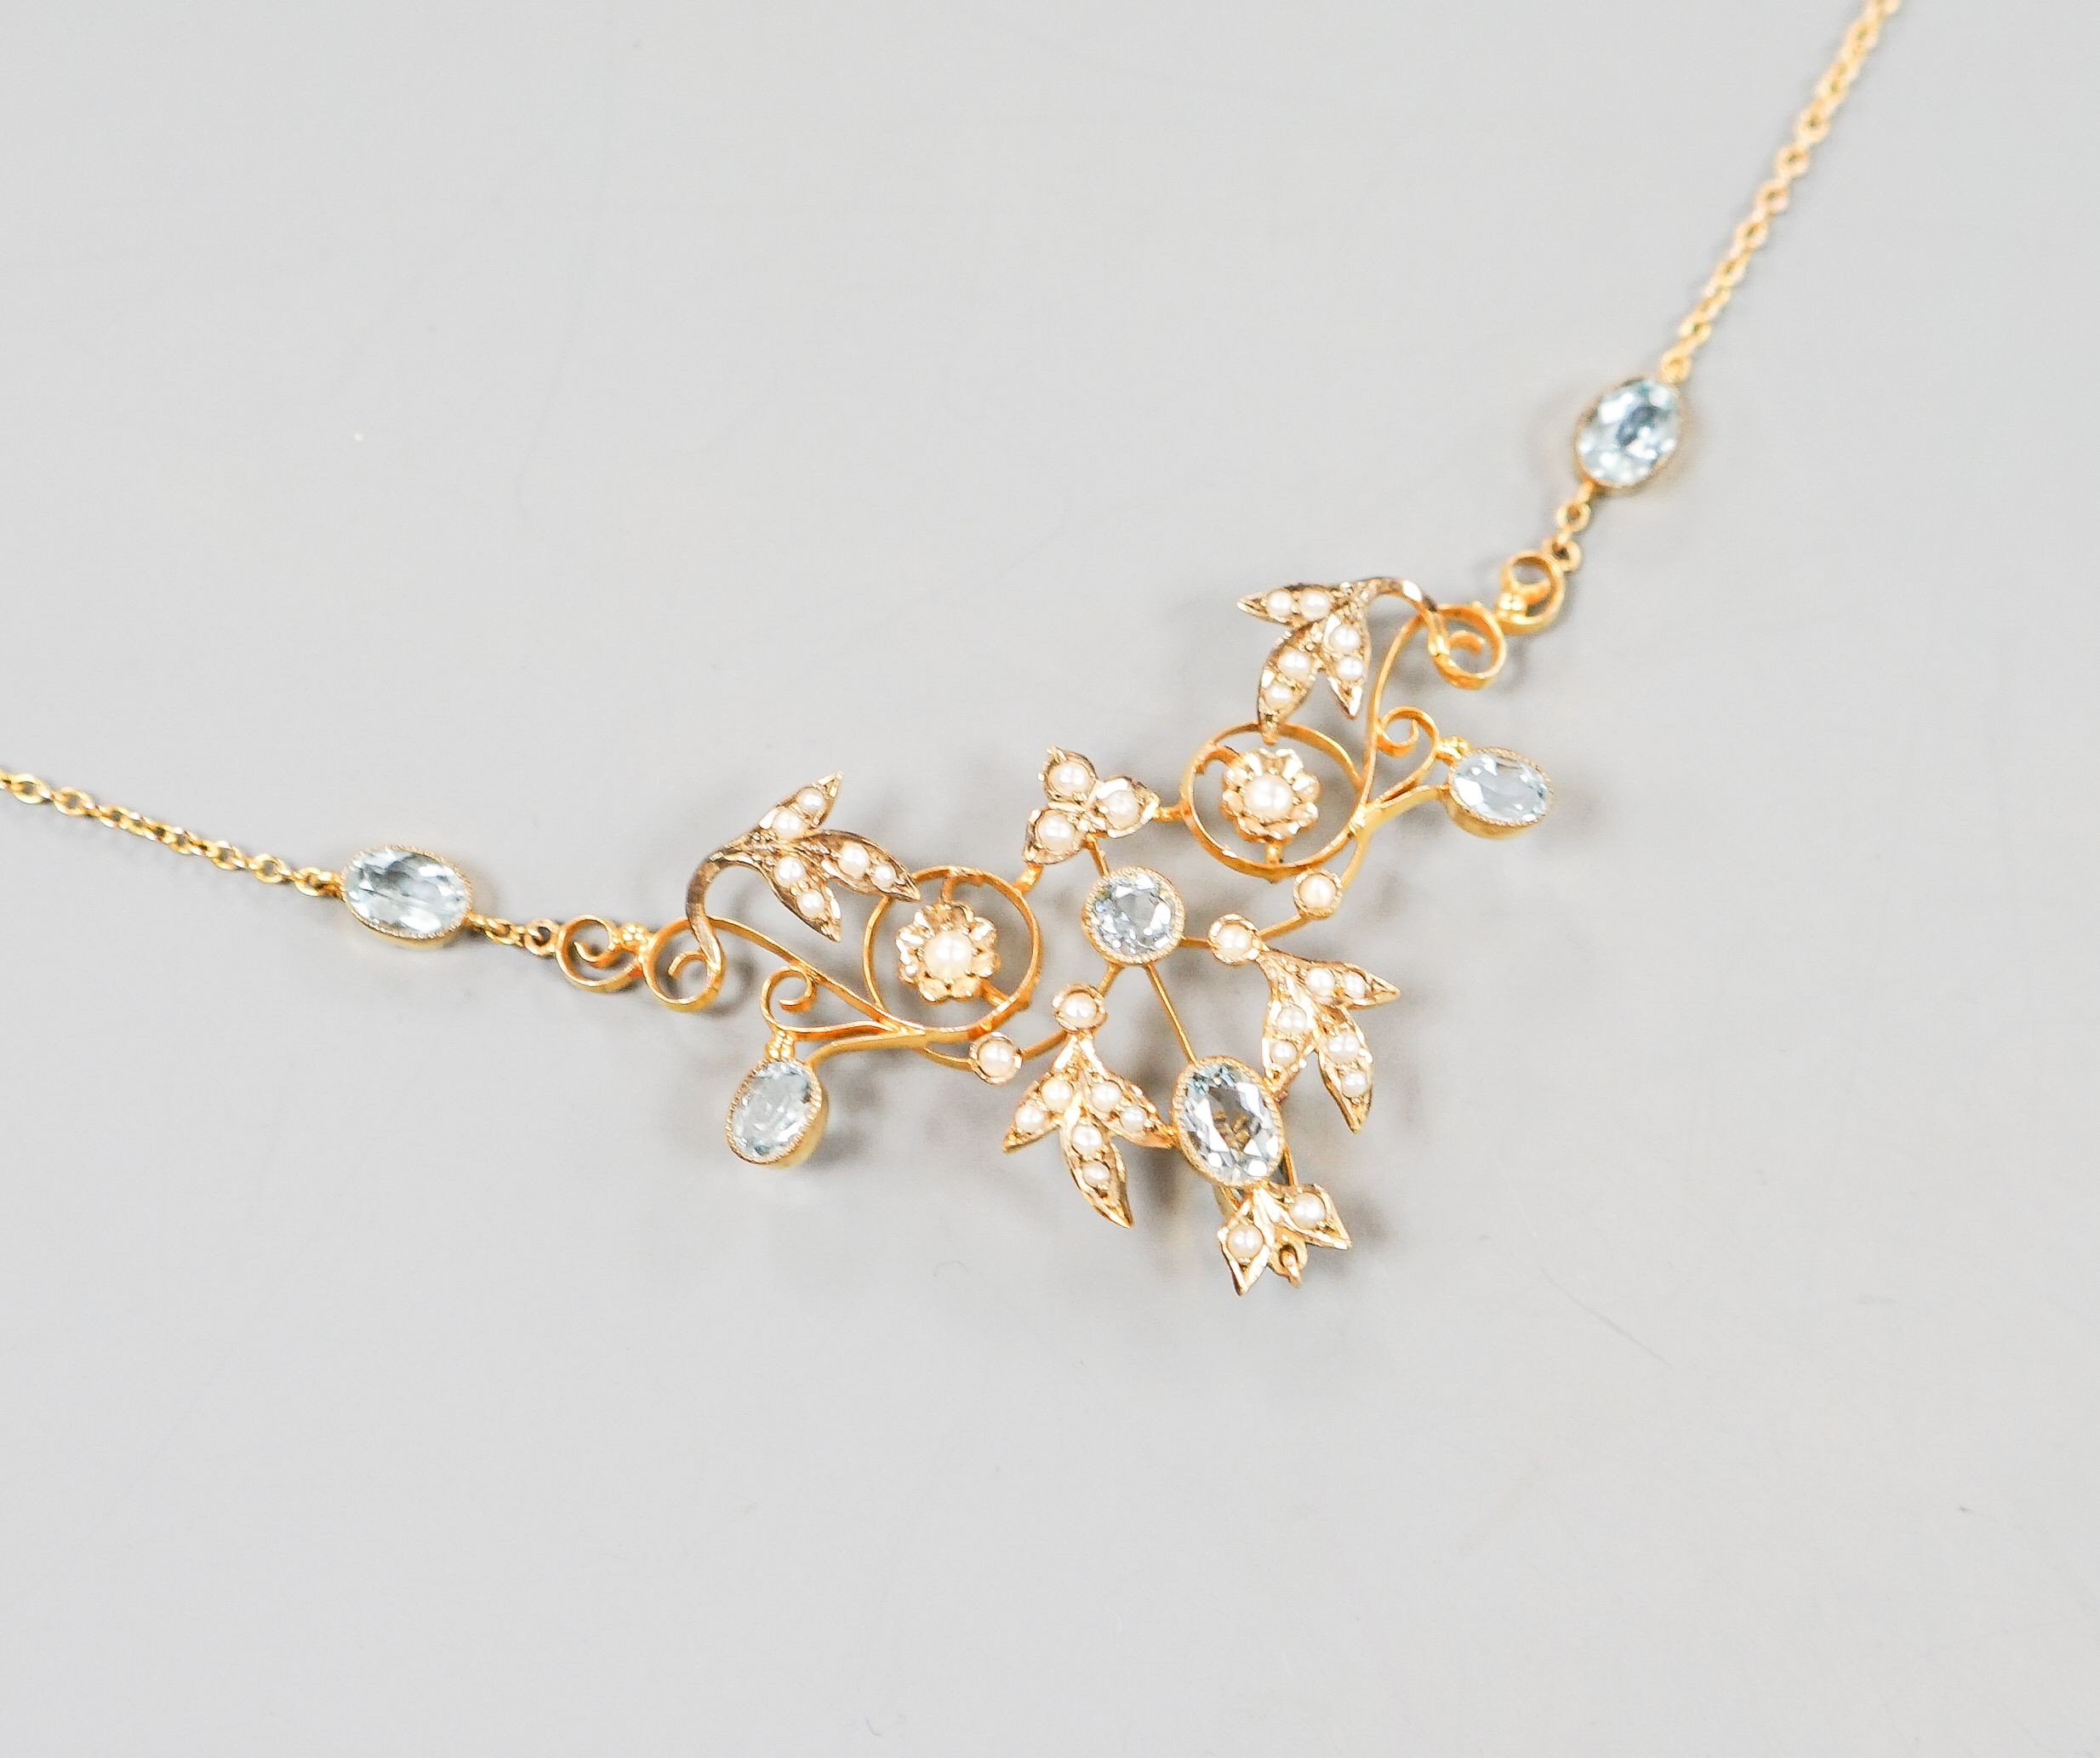 An Edwardian 9ct, aquamarine and seed pearl set drop pendant necklace, 40cm, gross weight 7.2 grams.